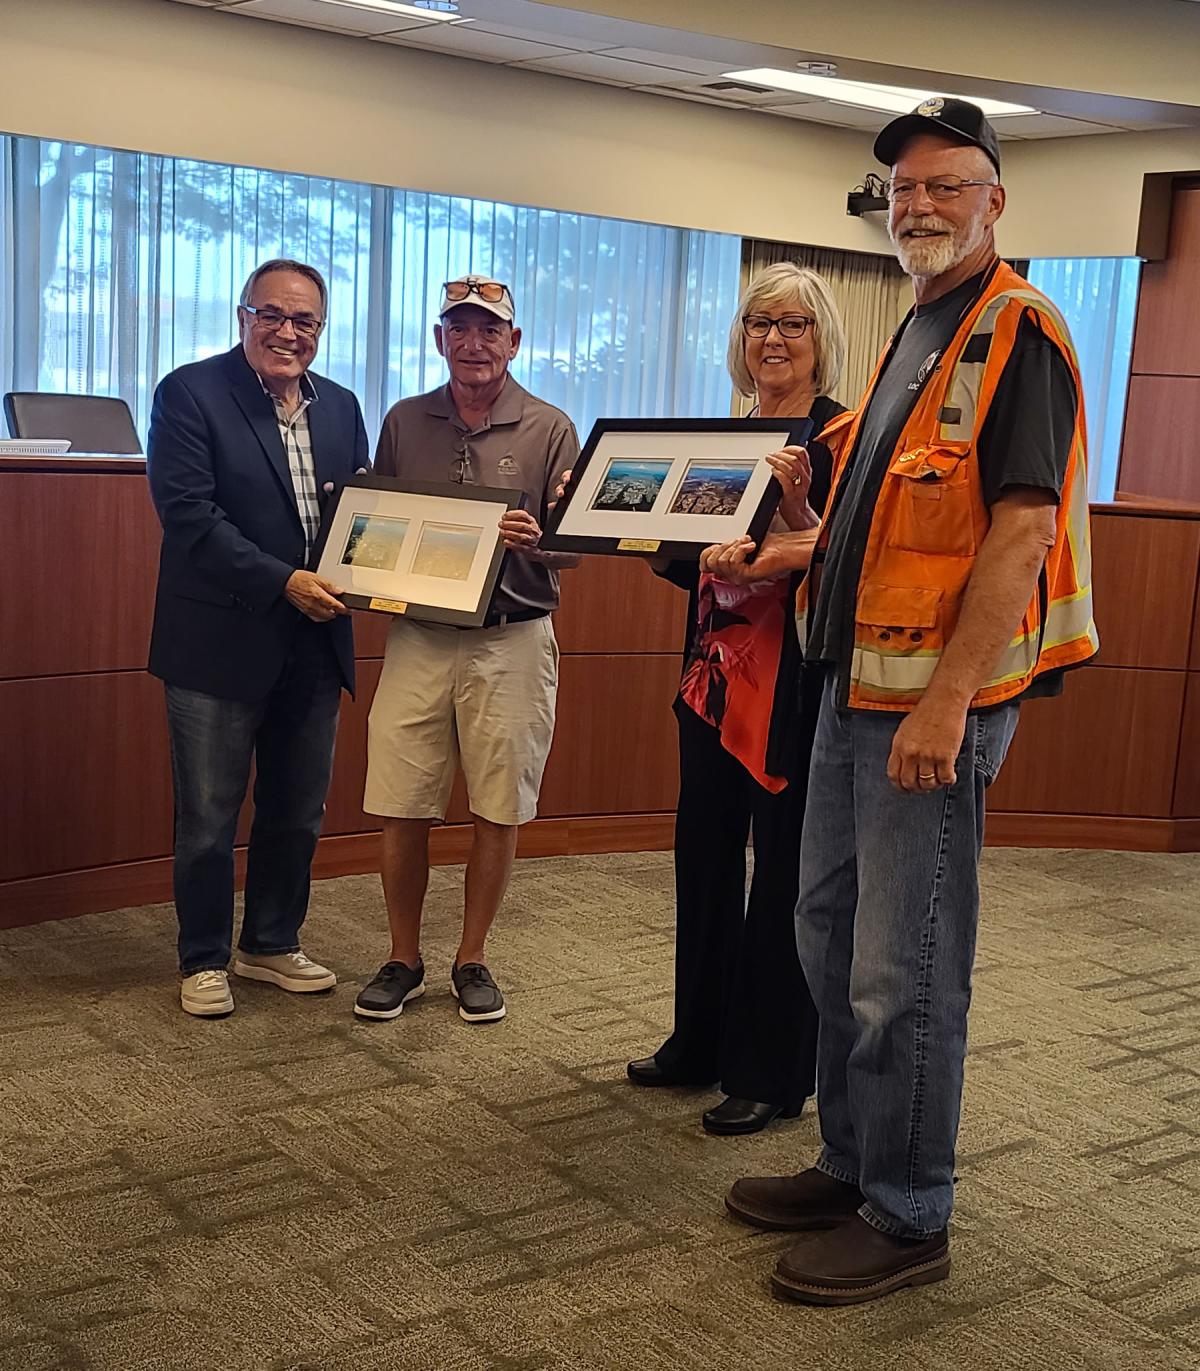 Retiring Port employees Pete Marzano and Dave Fjeld